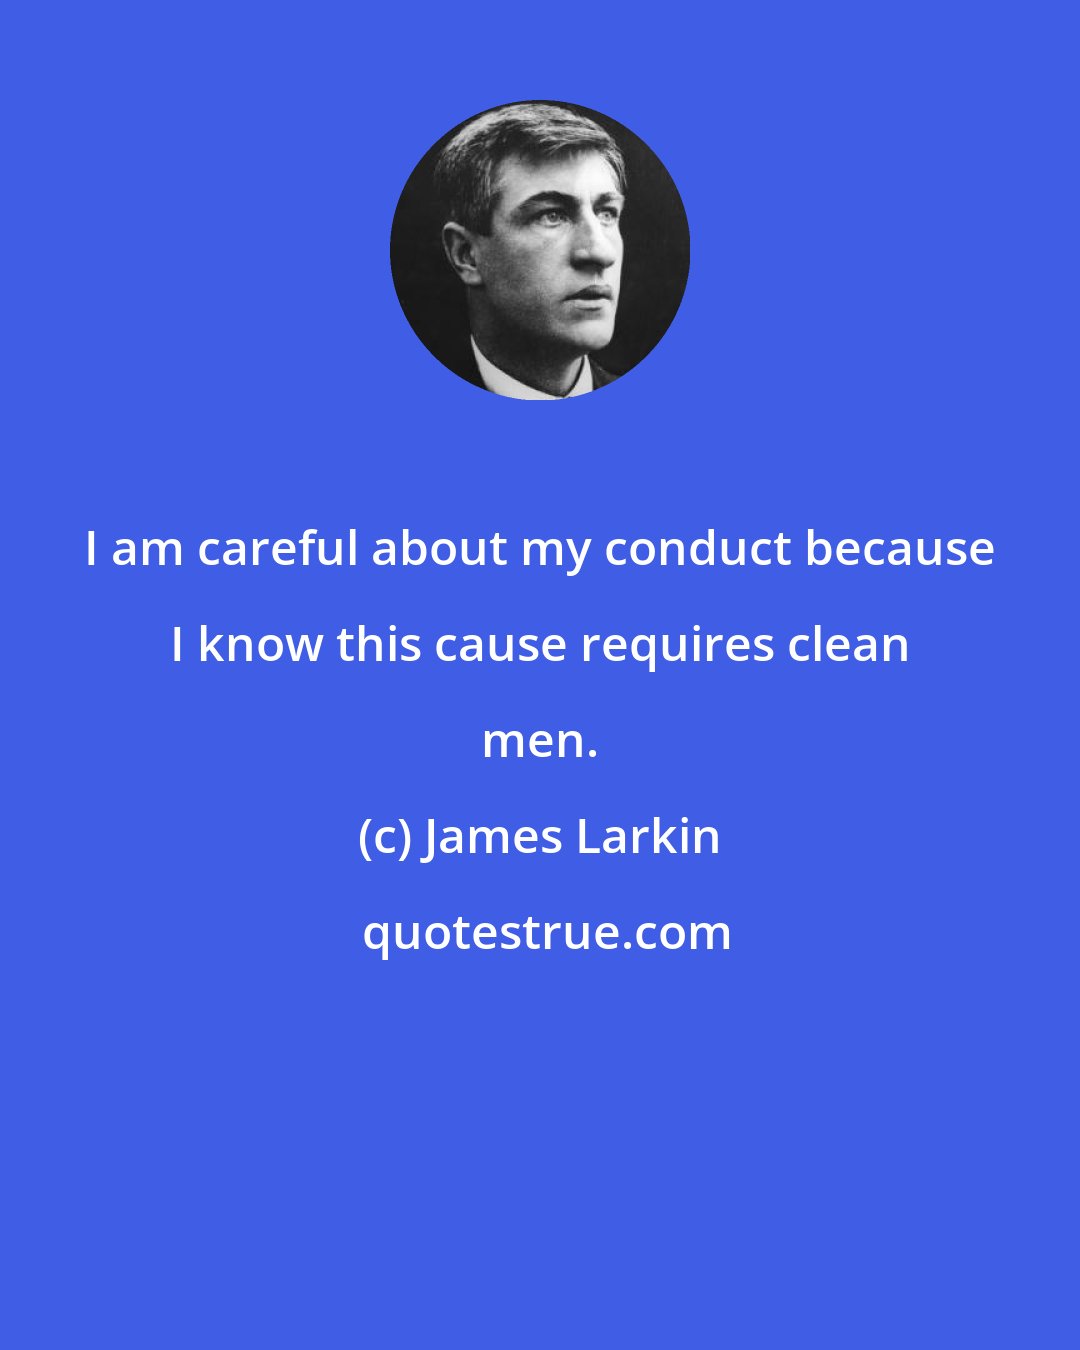 James Larkin: I am careful about my conduct because I know this cause requires clean men.